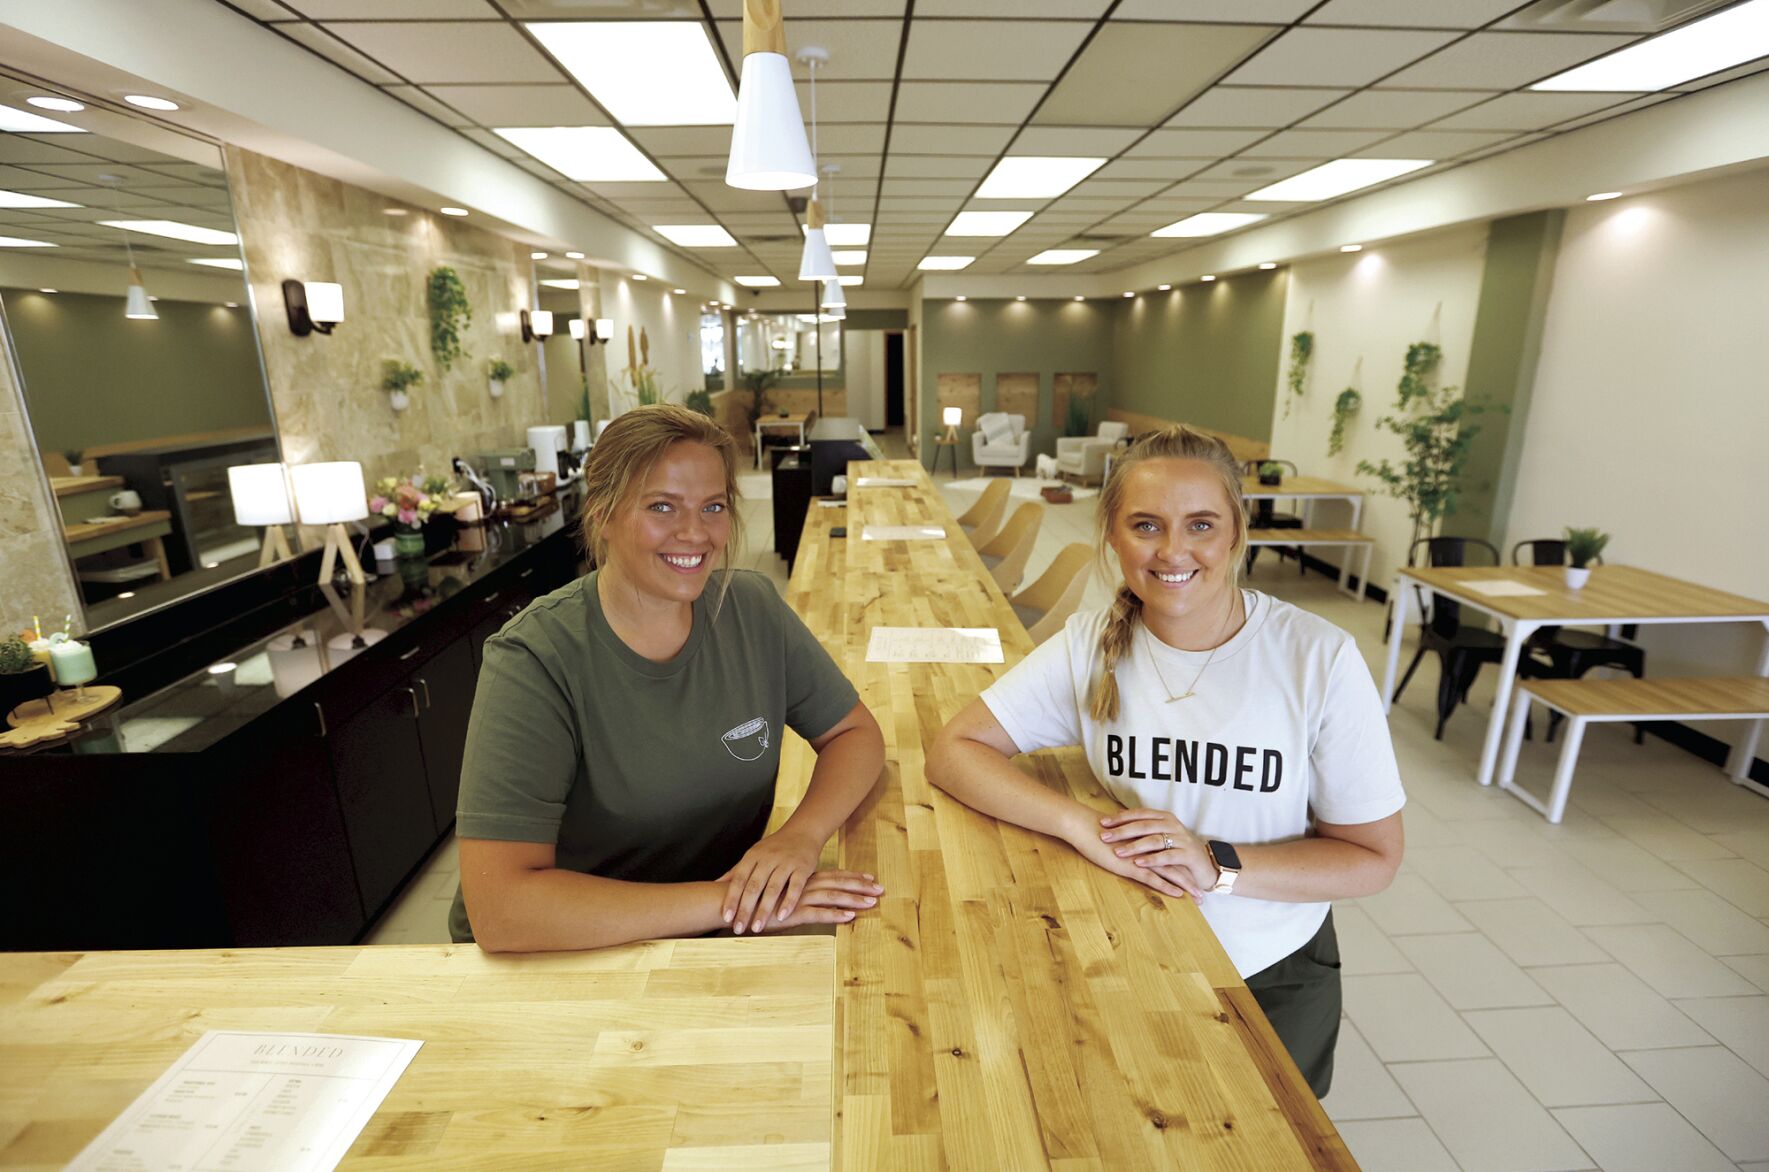 Owners Tia Recker (left) and Macy Joseph opened Blended on Saturday in Dyersville, Iowa.    PHOTO CREDIT: JESSICA REILLY